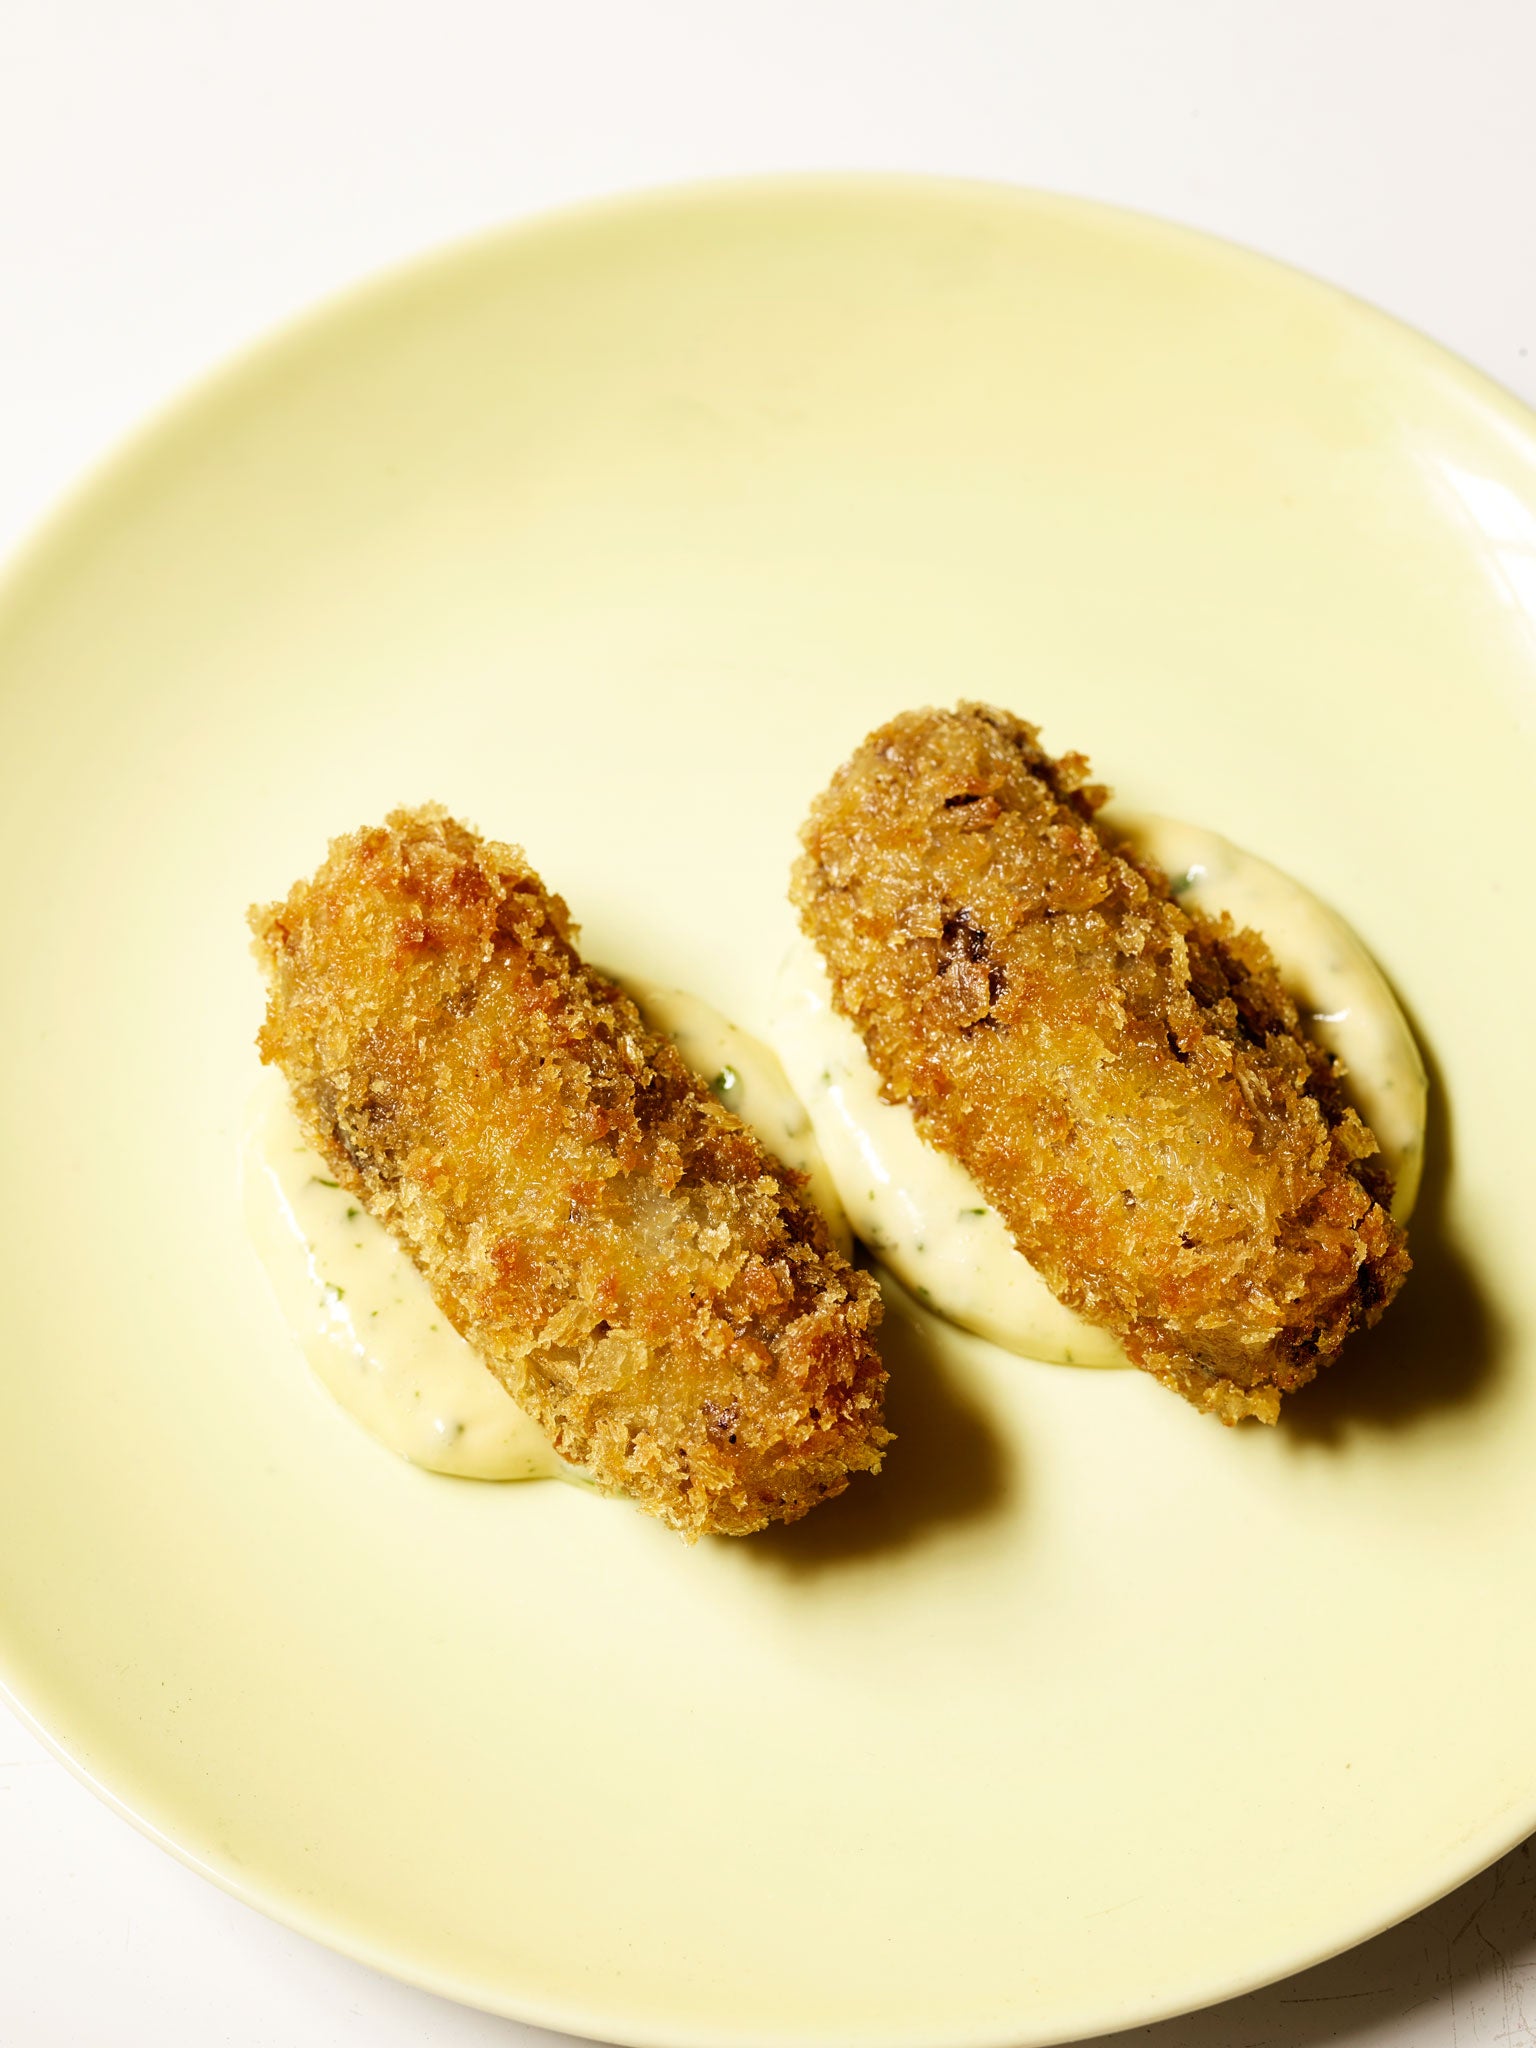 Haggis and neep croquettes make a great snack to go with drinks